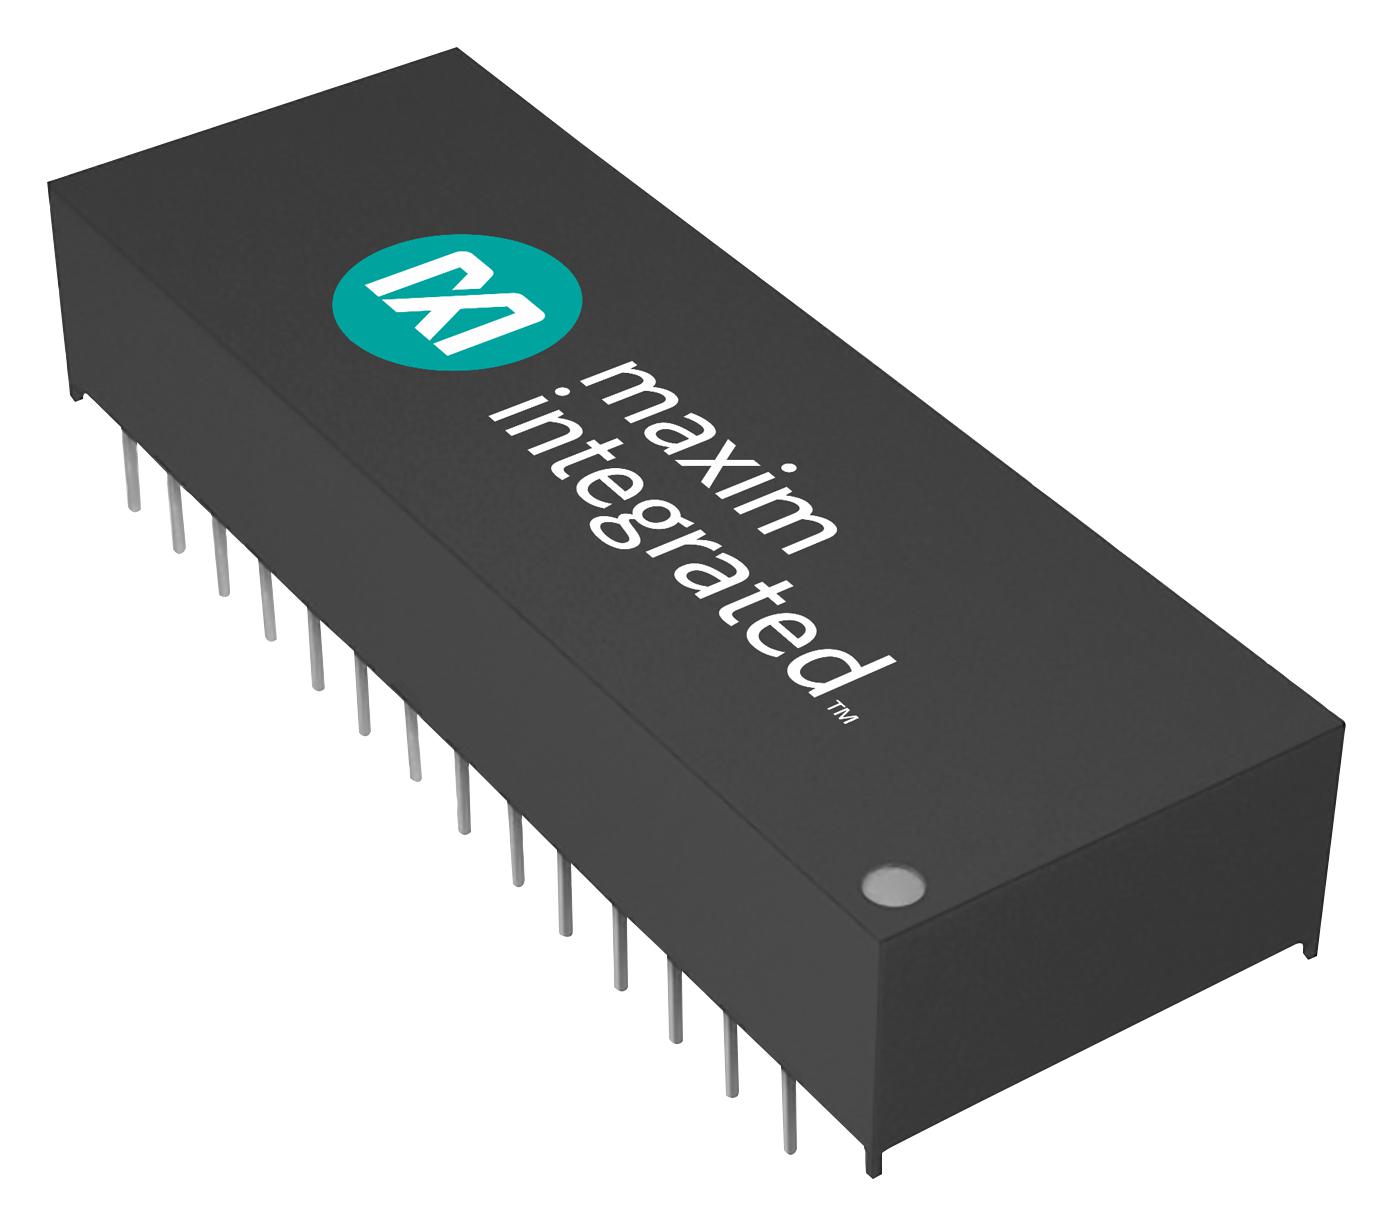 DS1230Y-70IND+ NON-VOLATILE SRAM, 256KBIT, 70NS, EDIP28 MAXIM INTEGRATED / ANALOG DEVICES